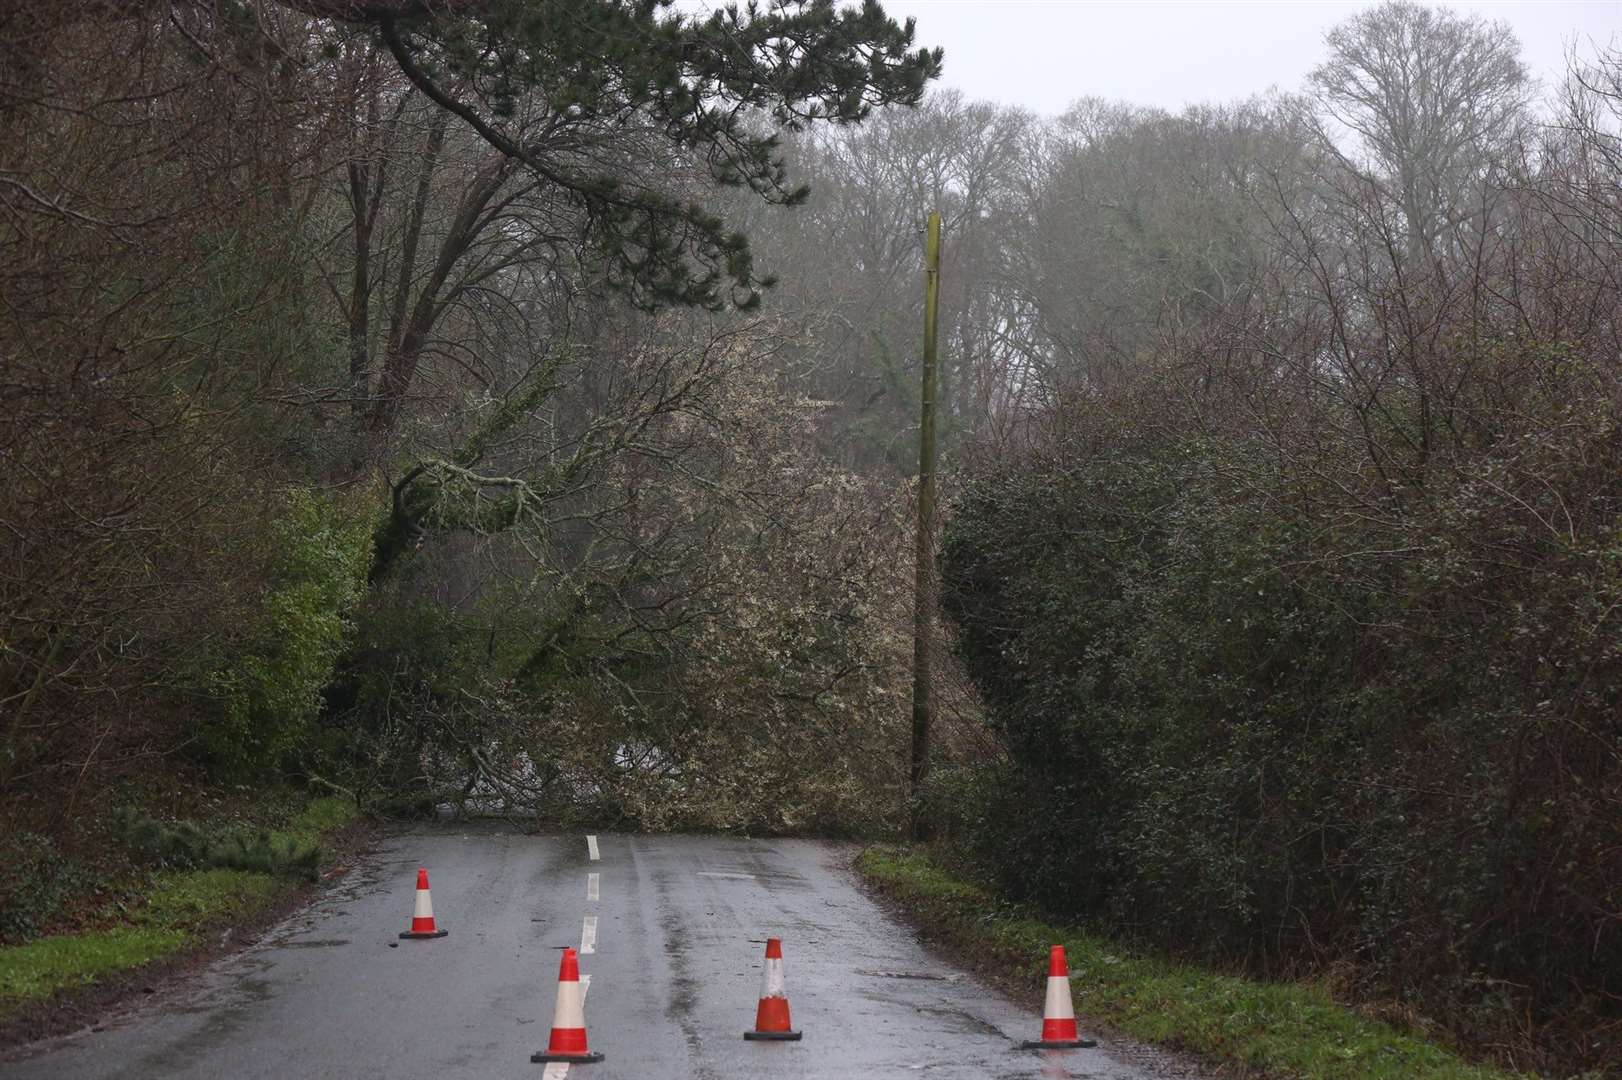 Storm Dennis blew down a tree in Iden Green Road, Benenden. Picture by UKNIP